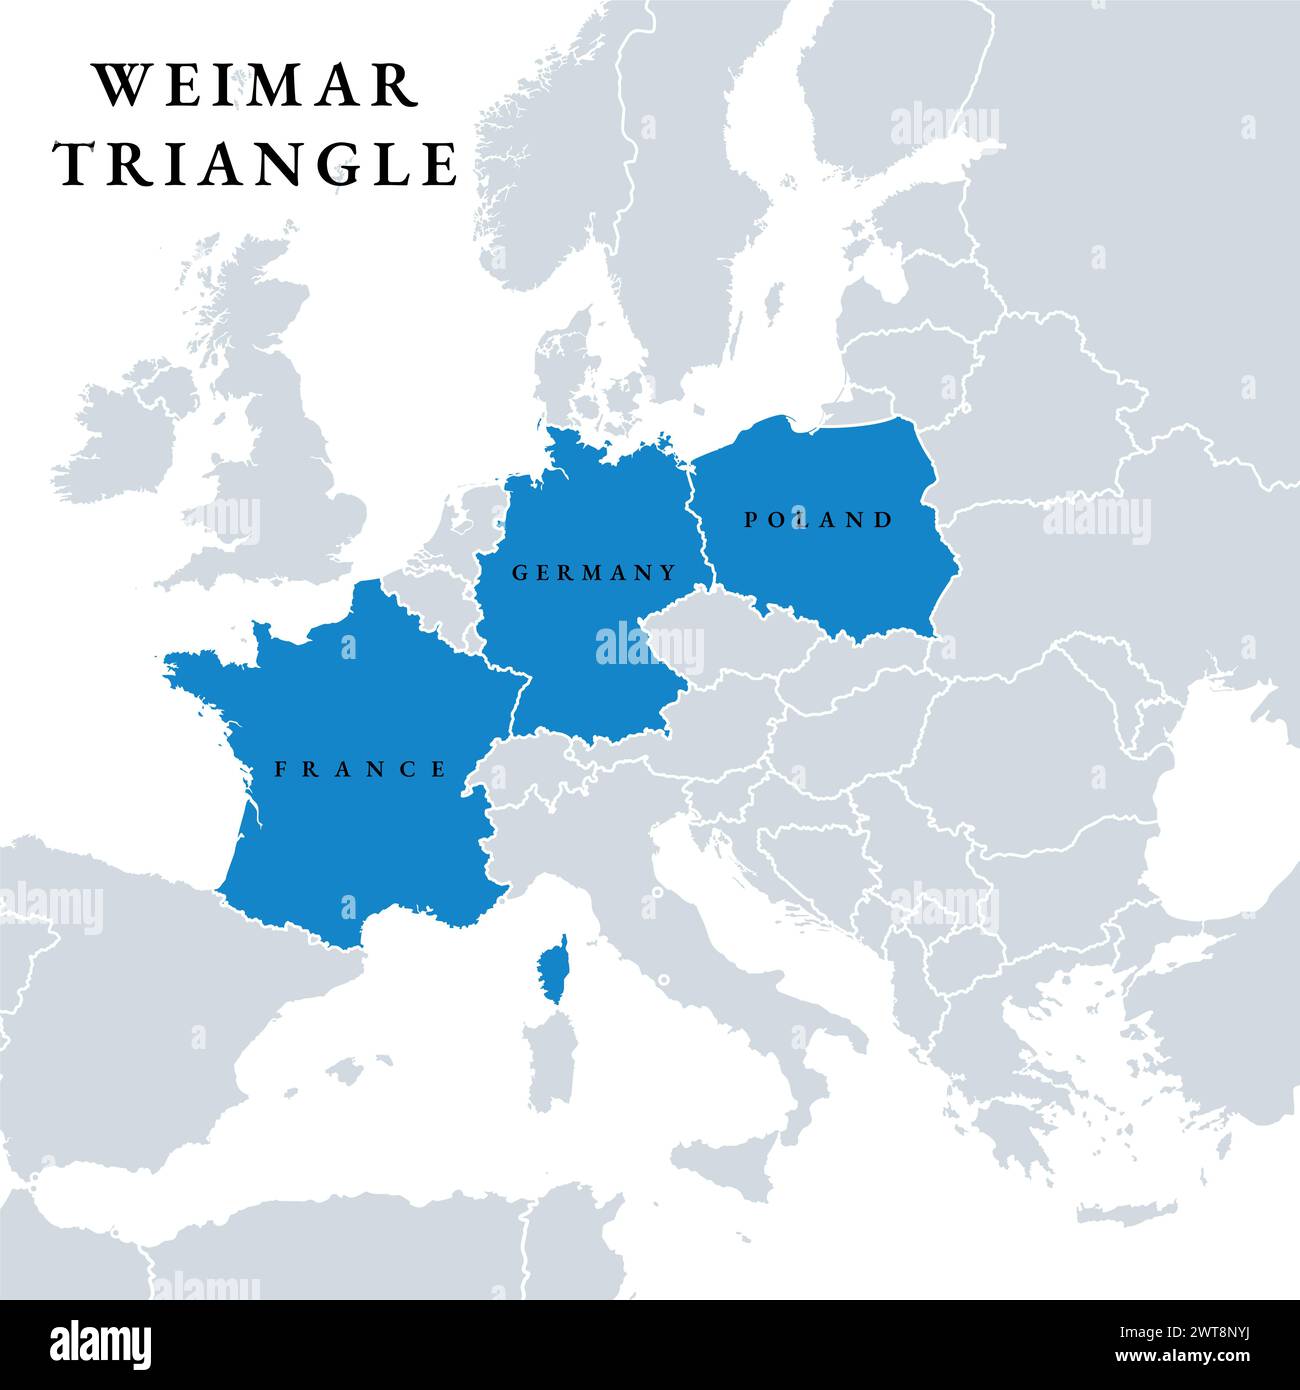 Weimar Triangle member states, political map. Regional alliance of France, Germany and Poland, created in 1991 in the German city of Weimar. Stock Photo